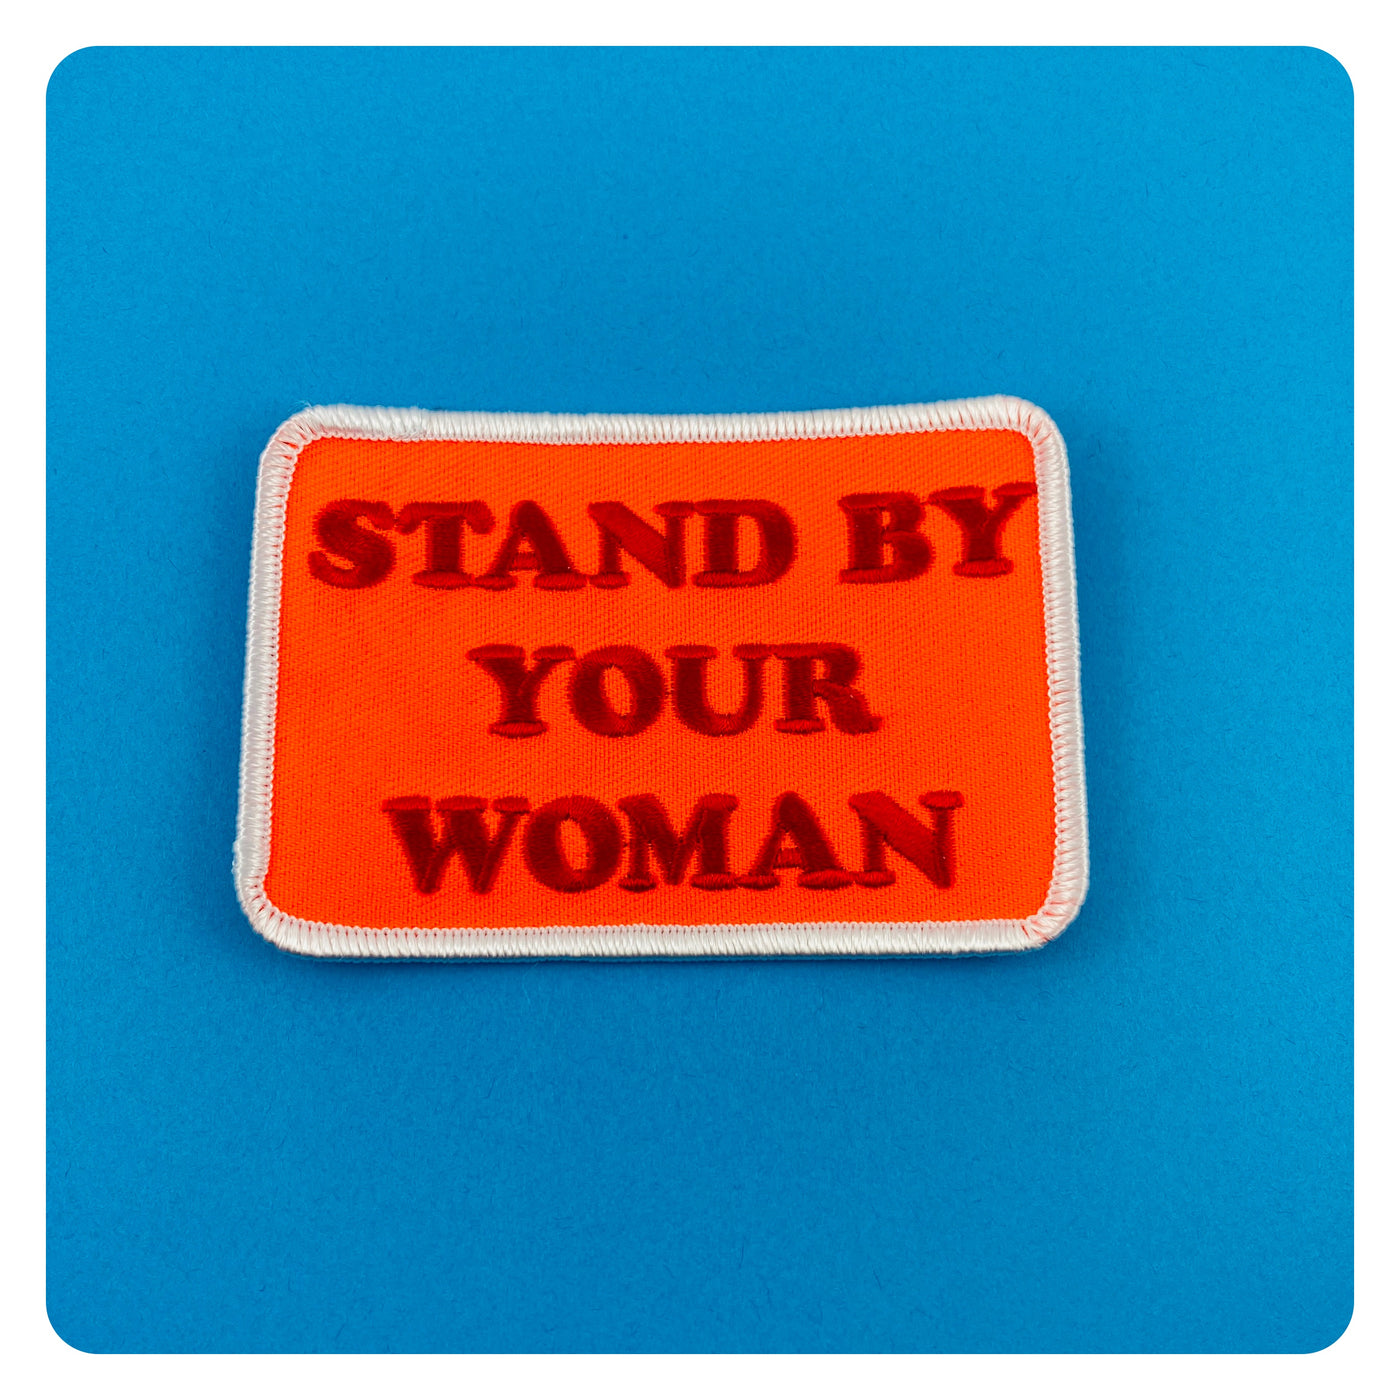 Stand By Your Woman patch